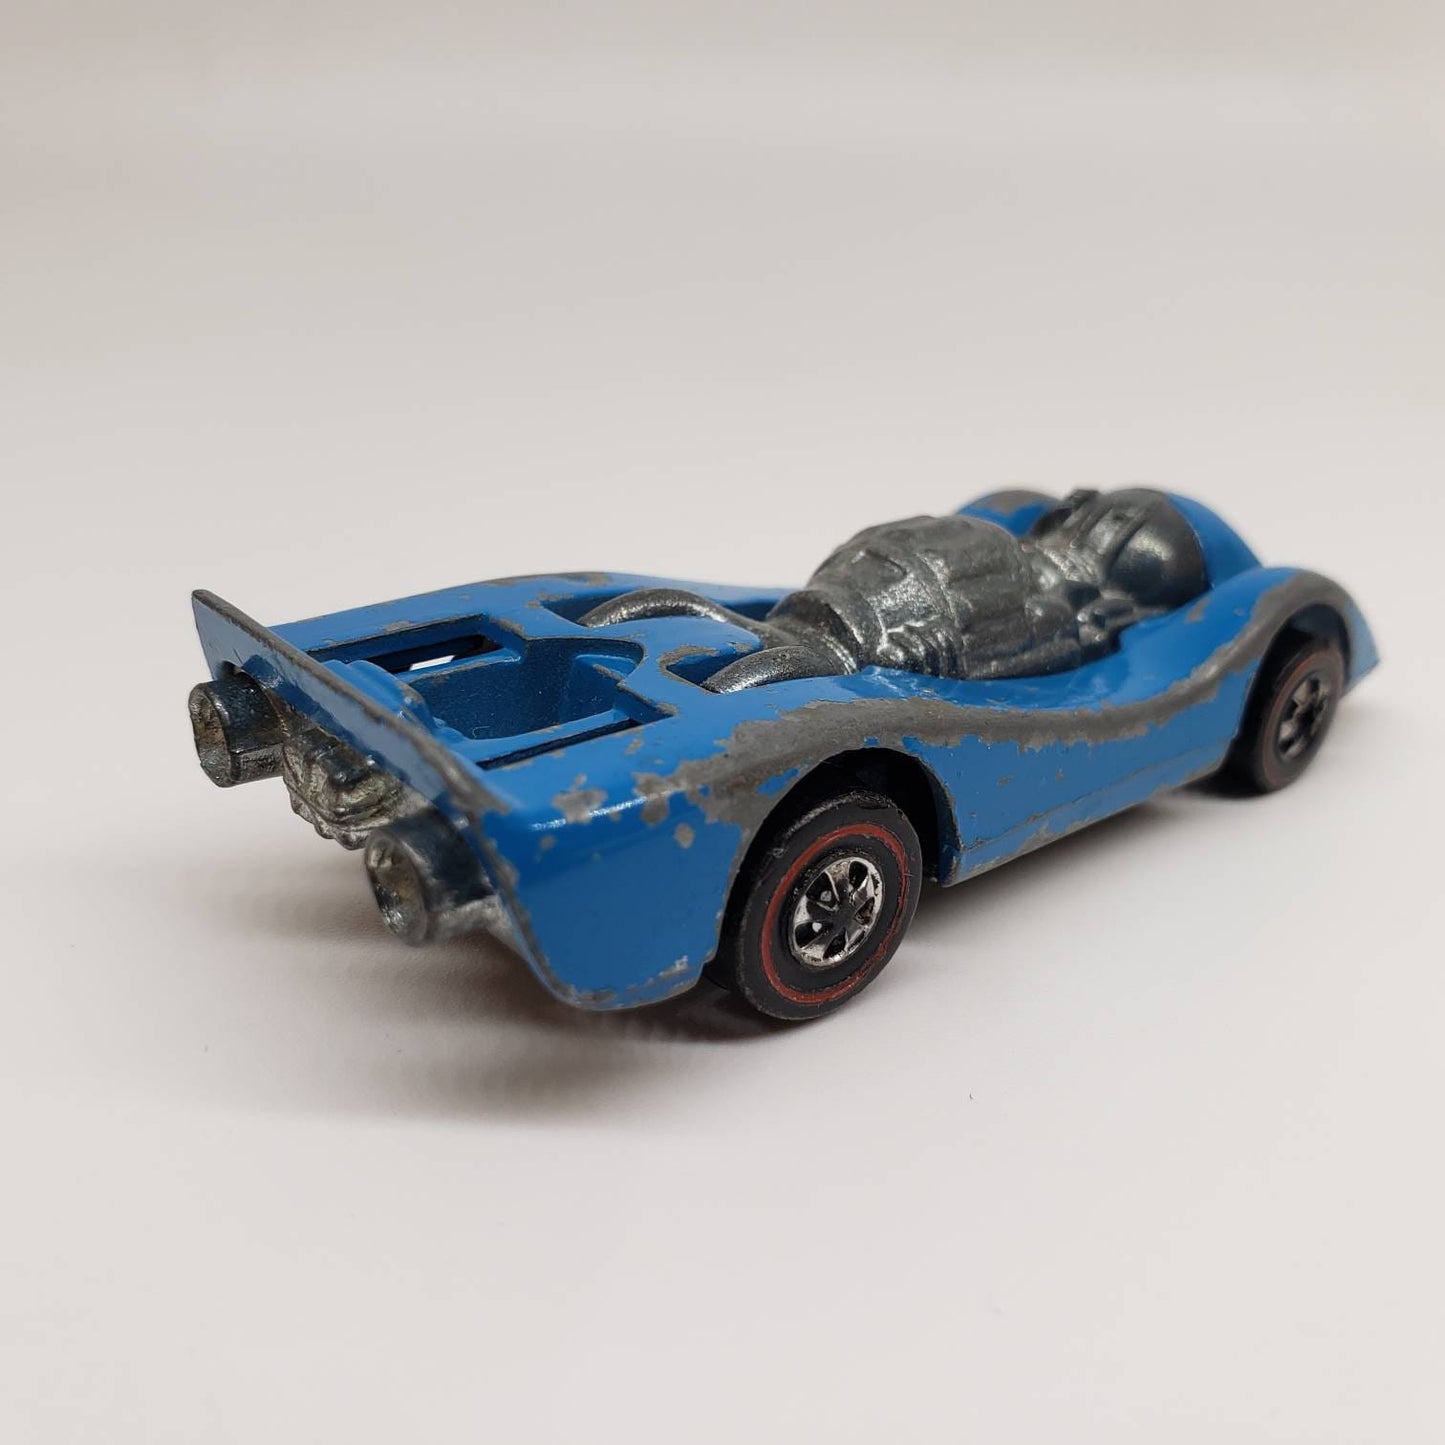 1973 Redline Jet Threat Blue Shell Promos Hot Wheels Collectable Scale Model Miniature Toy Car Perfect Birthday Gift